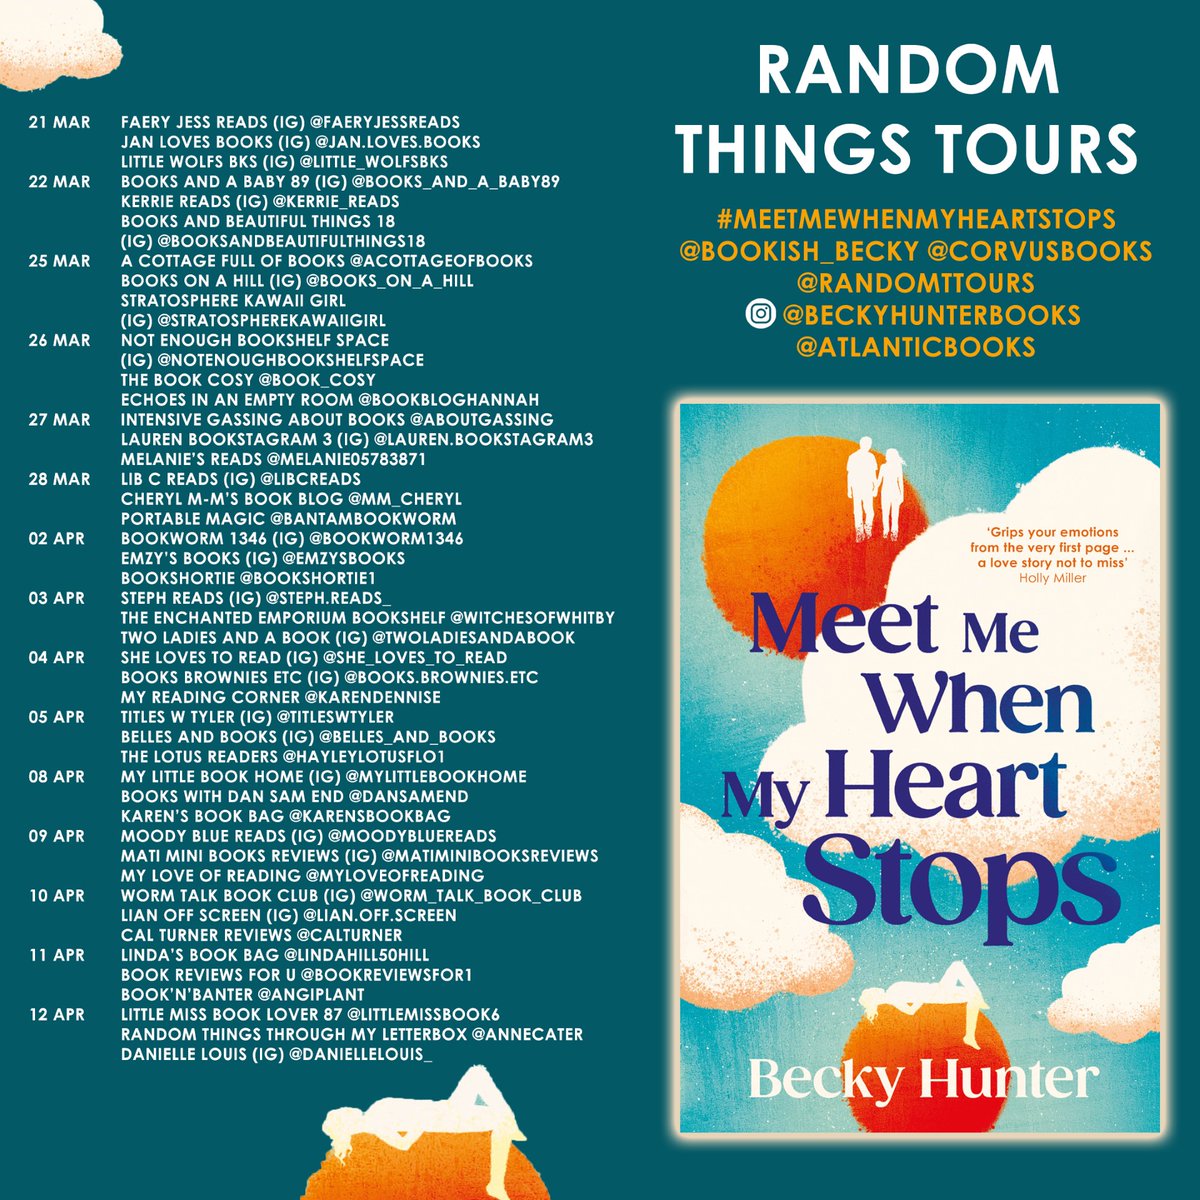 HUGEST THANKS #RandomThingsTours Bloggers for supporting #MeetMeWhenMyHeartStops @Bookish_Becky @CorvusBooks 

Please share reviews on Amazon/Goodreads 

@Bookshortie1 
@WitchesOfWhitby 
@karendennise 
@hayleylotusflo1 
@mylilbookhome 
@DanSamEnd 
@Karensbookbag